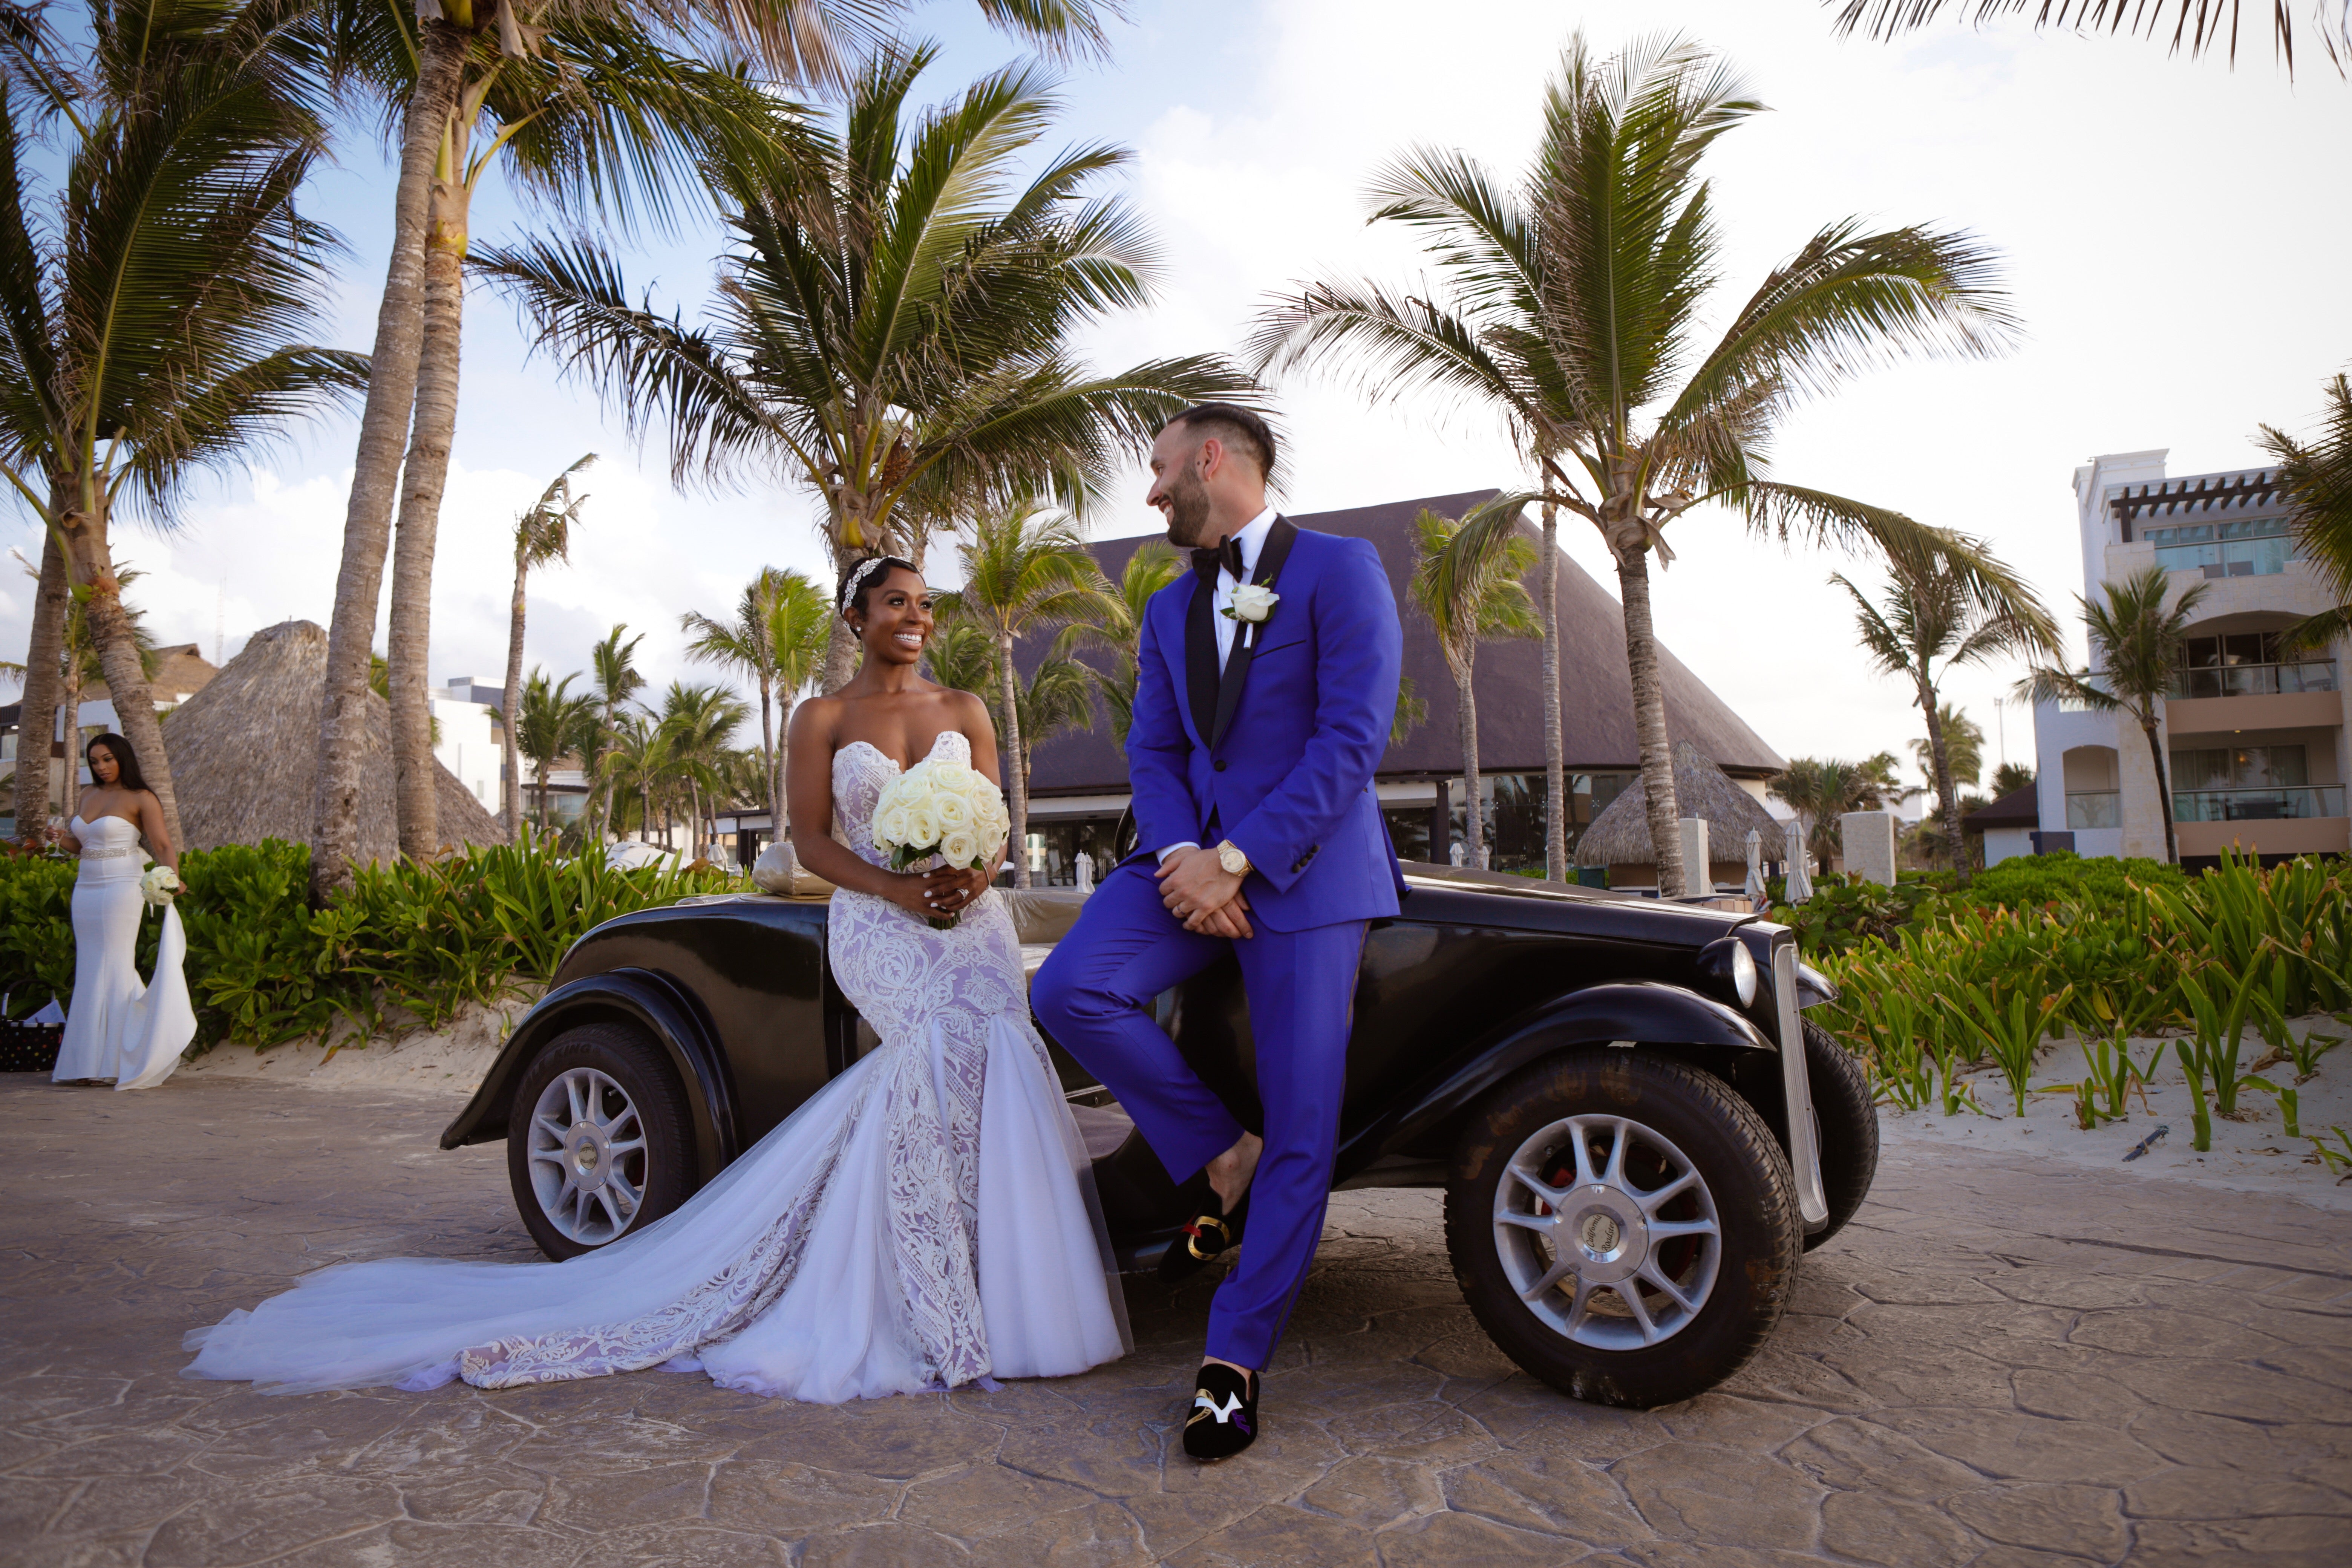 Bridal Bliss: Antonio And Alexis Brought Chic To The Beach For Their Gorgeous Wedding Day
